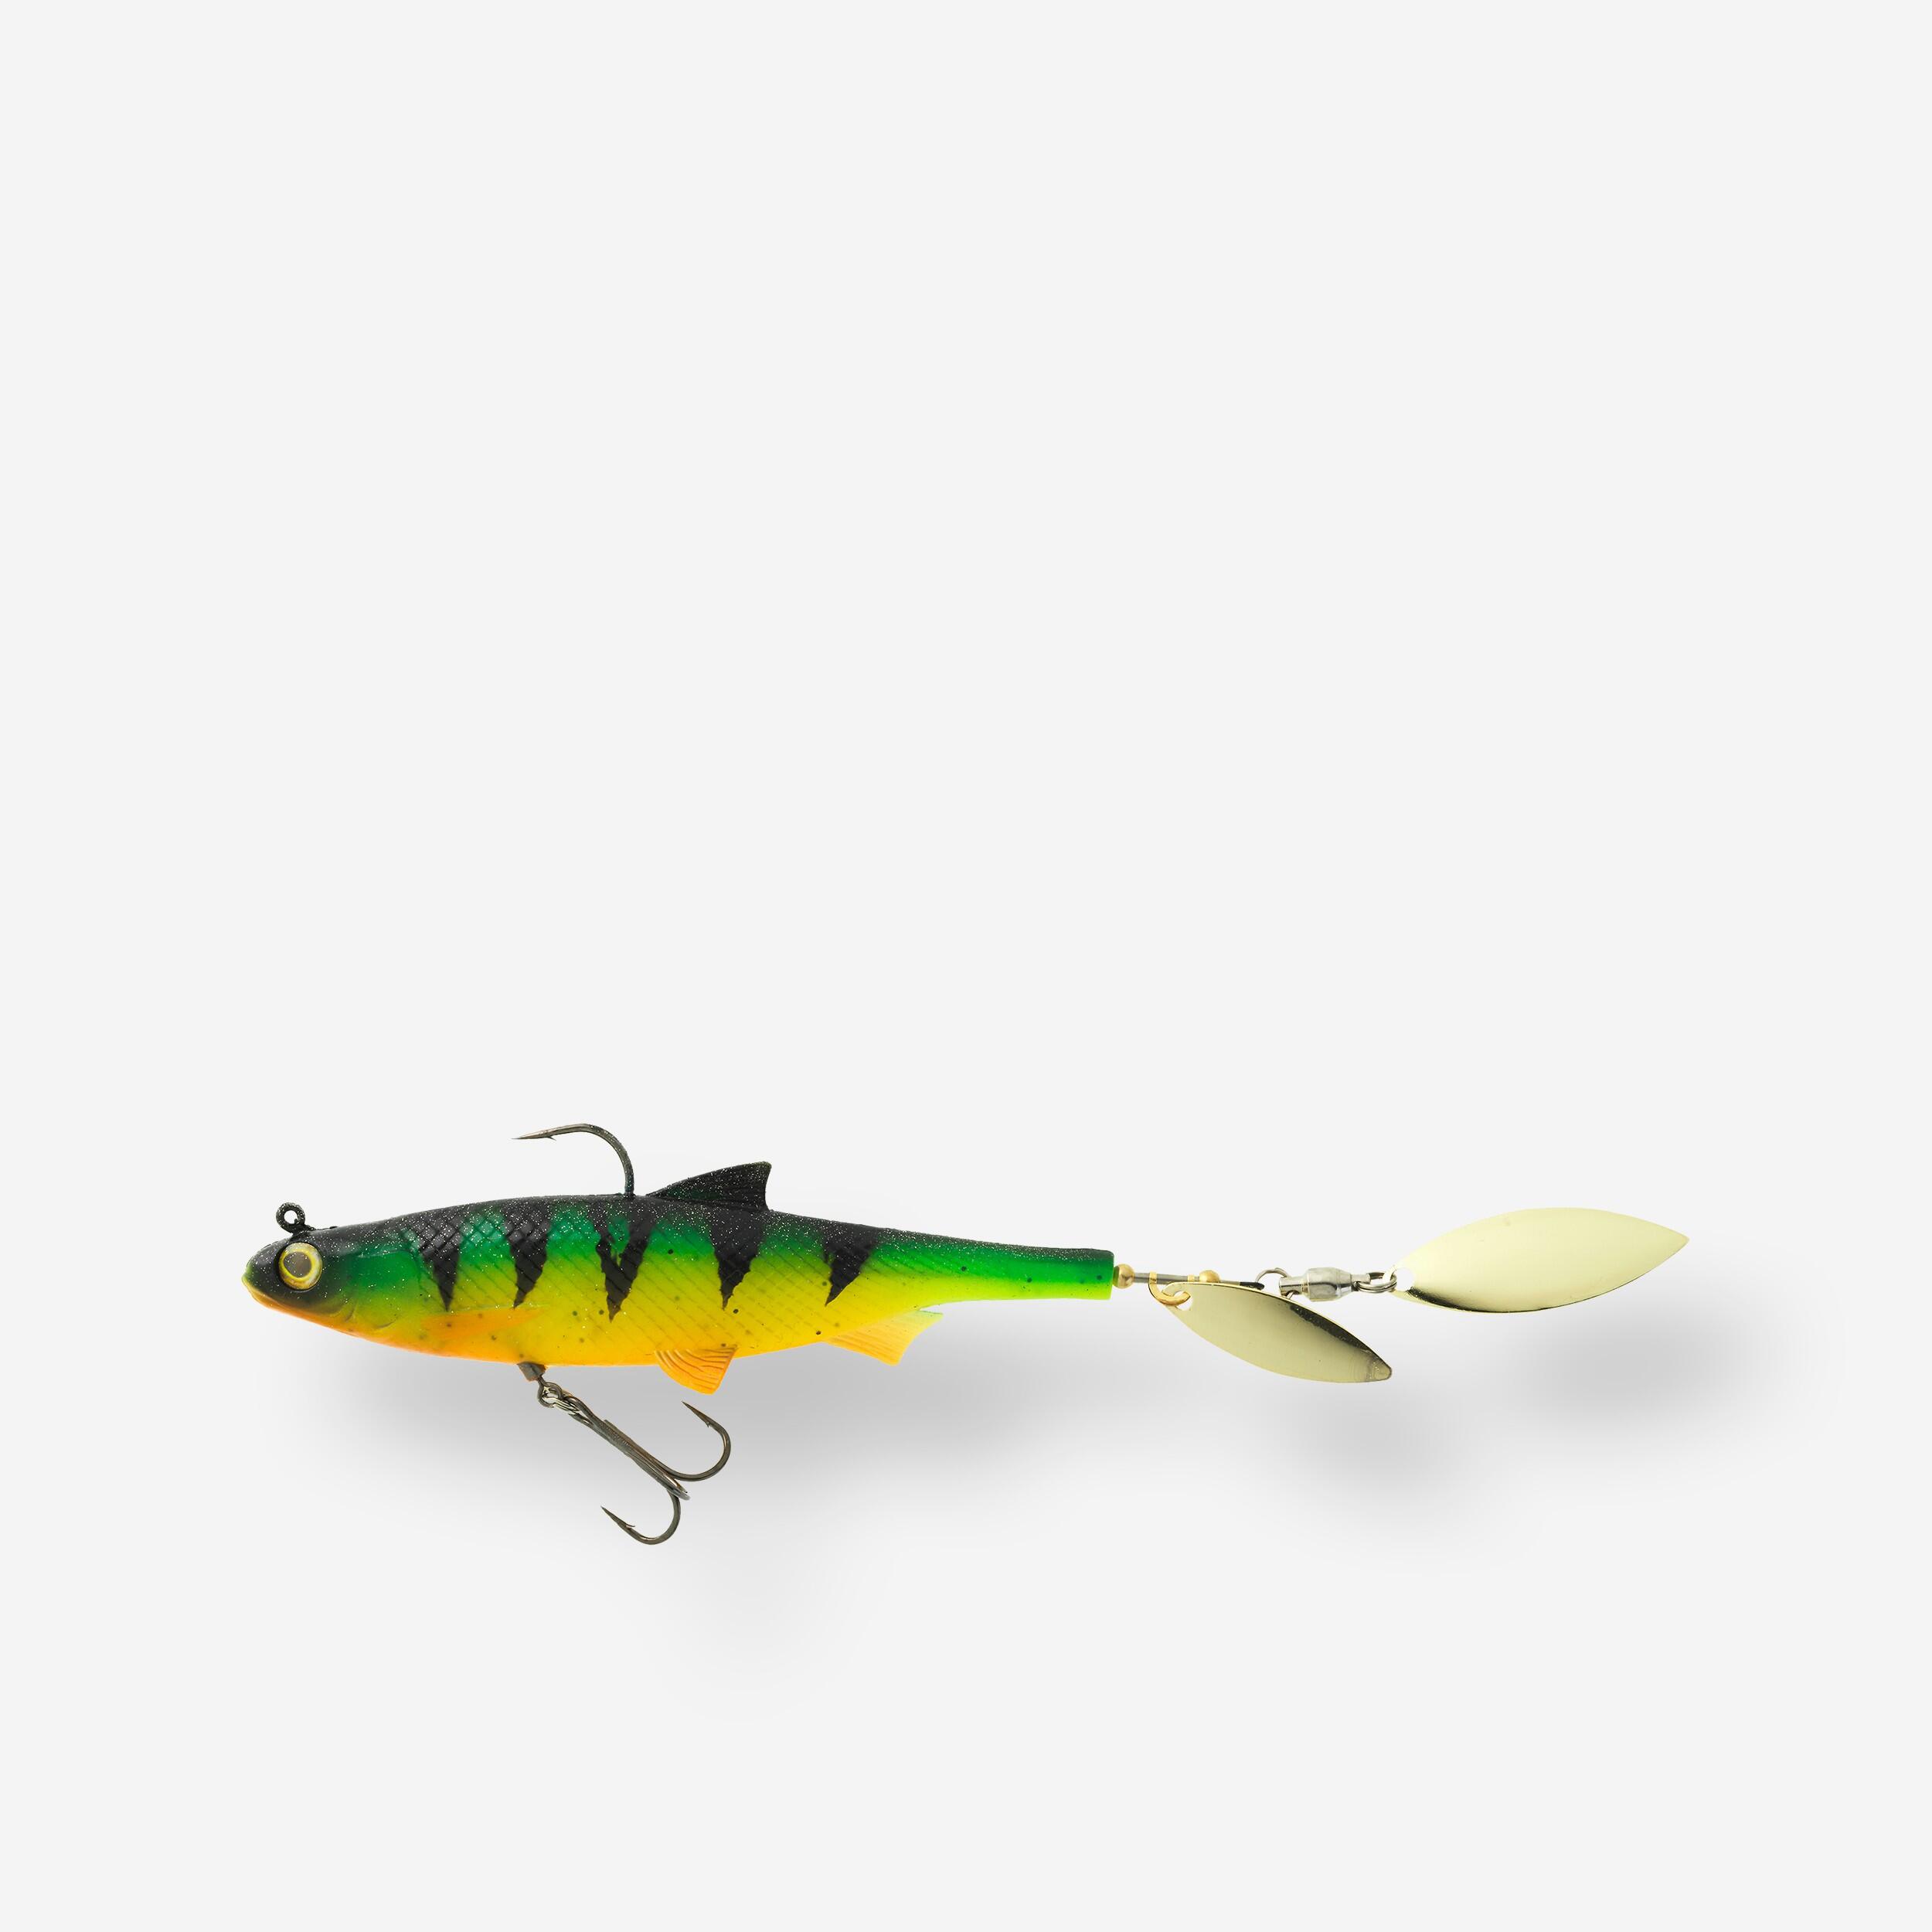 CAPERLAN LURE FISHING ROACHSPIN 120 FIRETIGER BLADED SHAD SOFT LURE